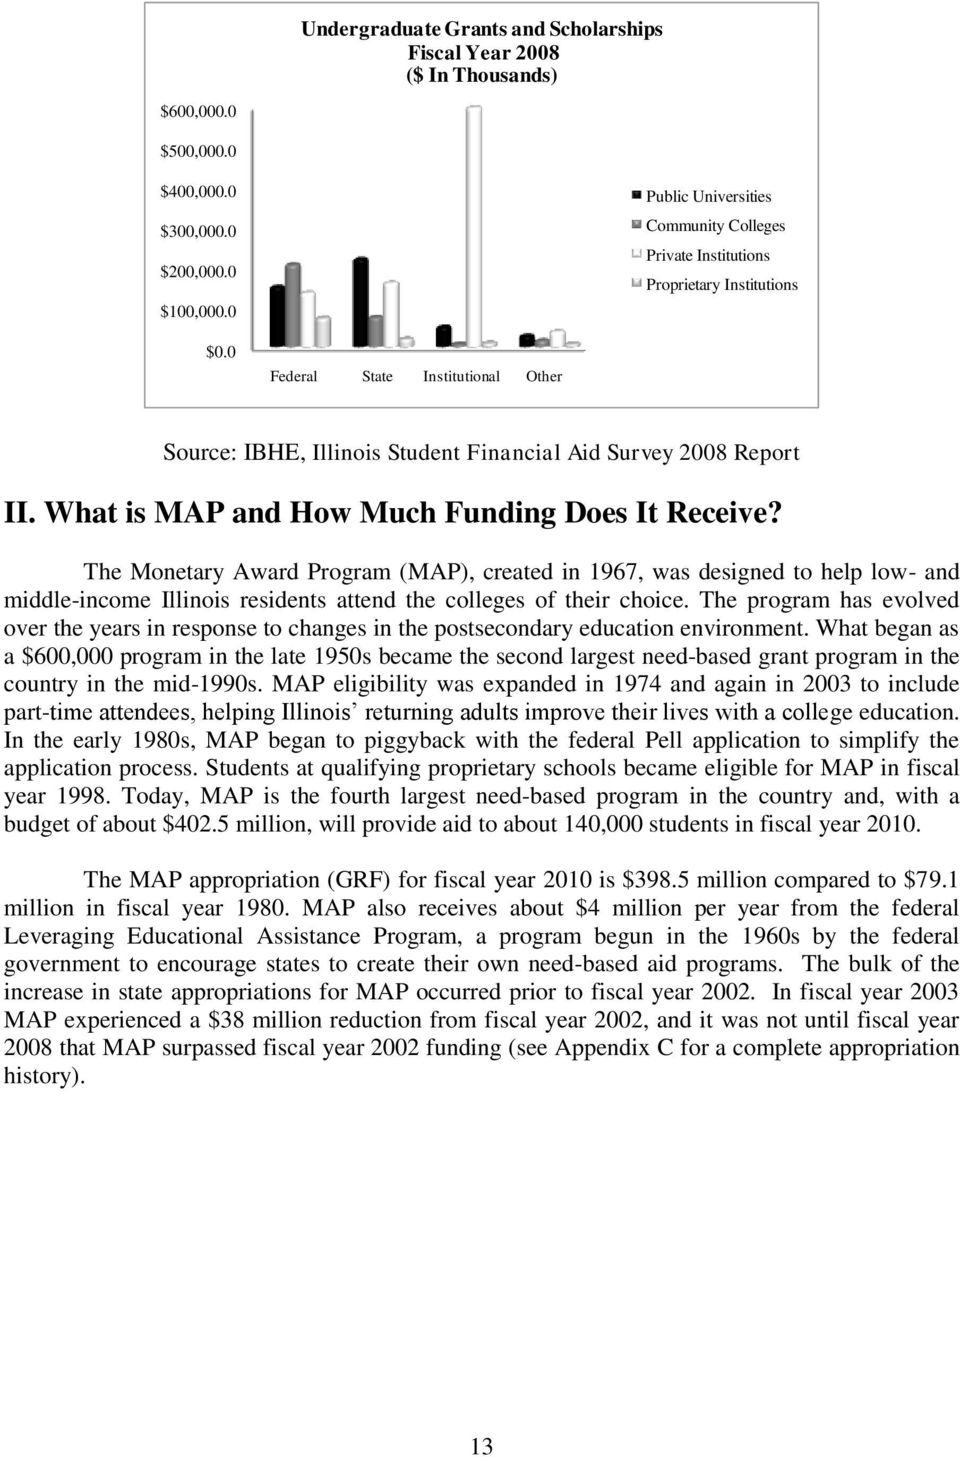 What is MAP and How Much Funding Does It Receive? The Monetary Award Program (MAP), created in 1967, was designed to help low- and middle-income Illinois residents attend the colleges of their choice.